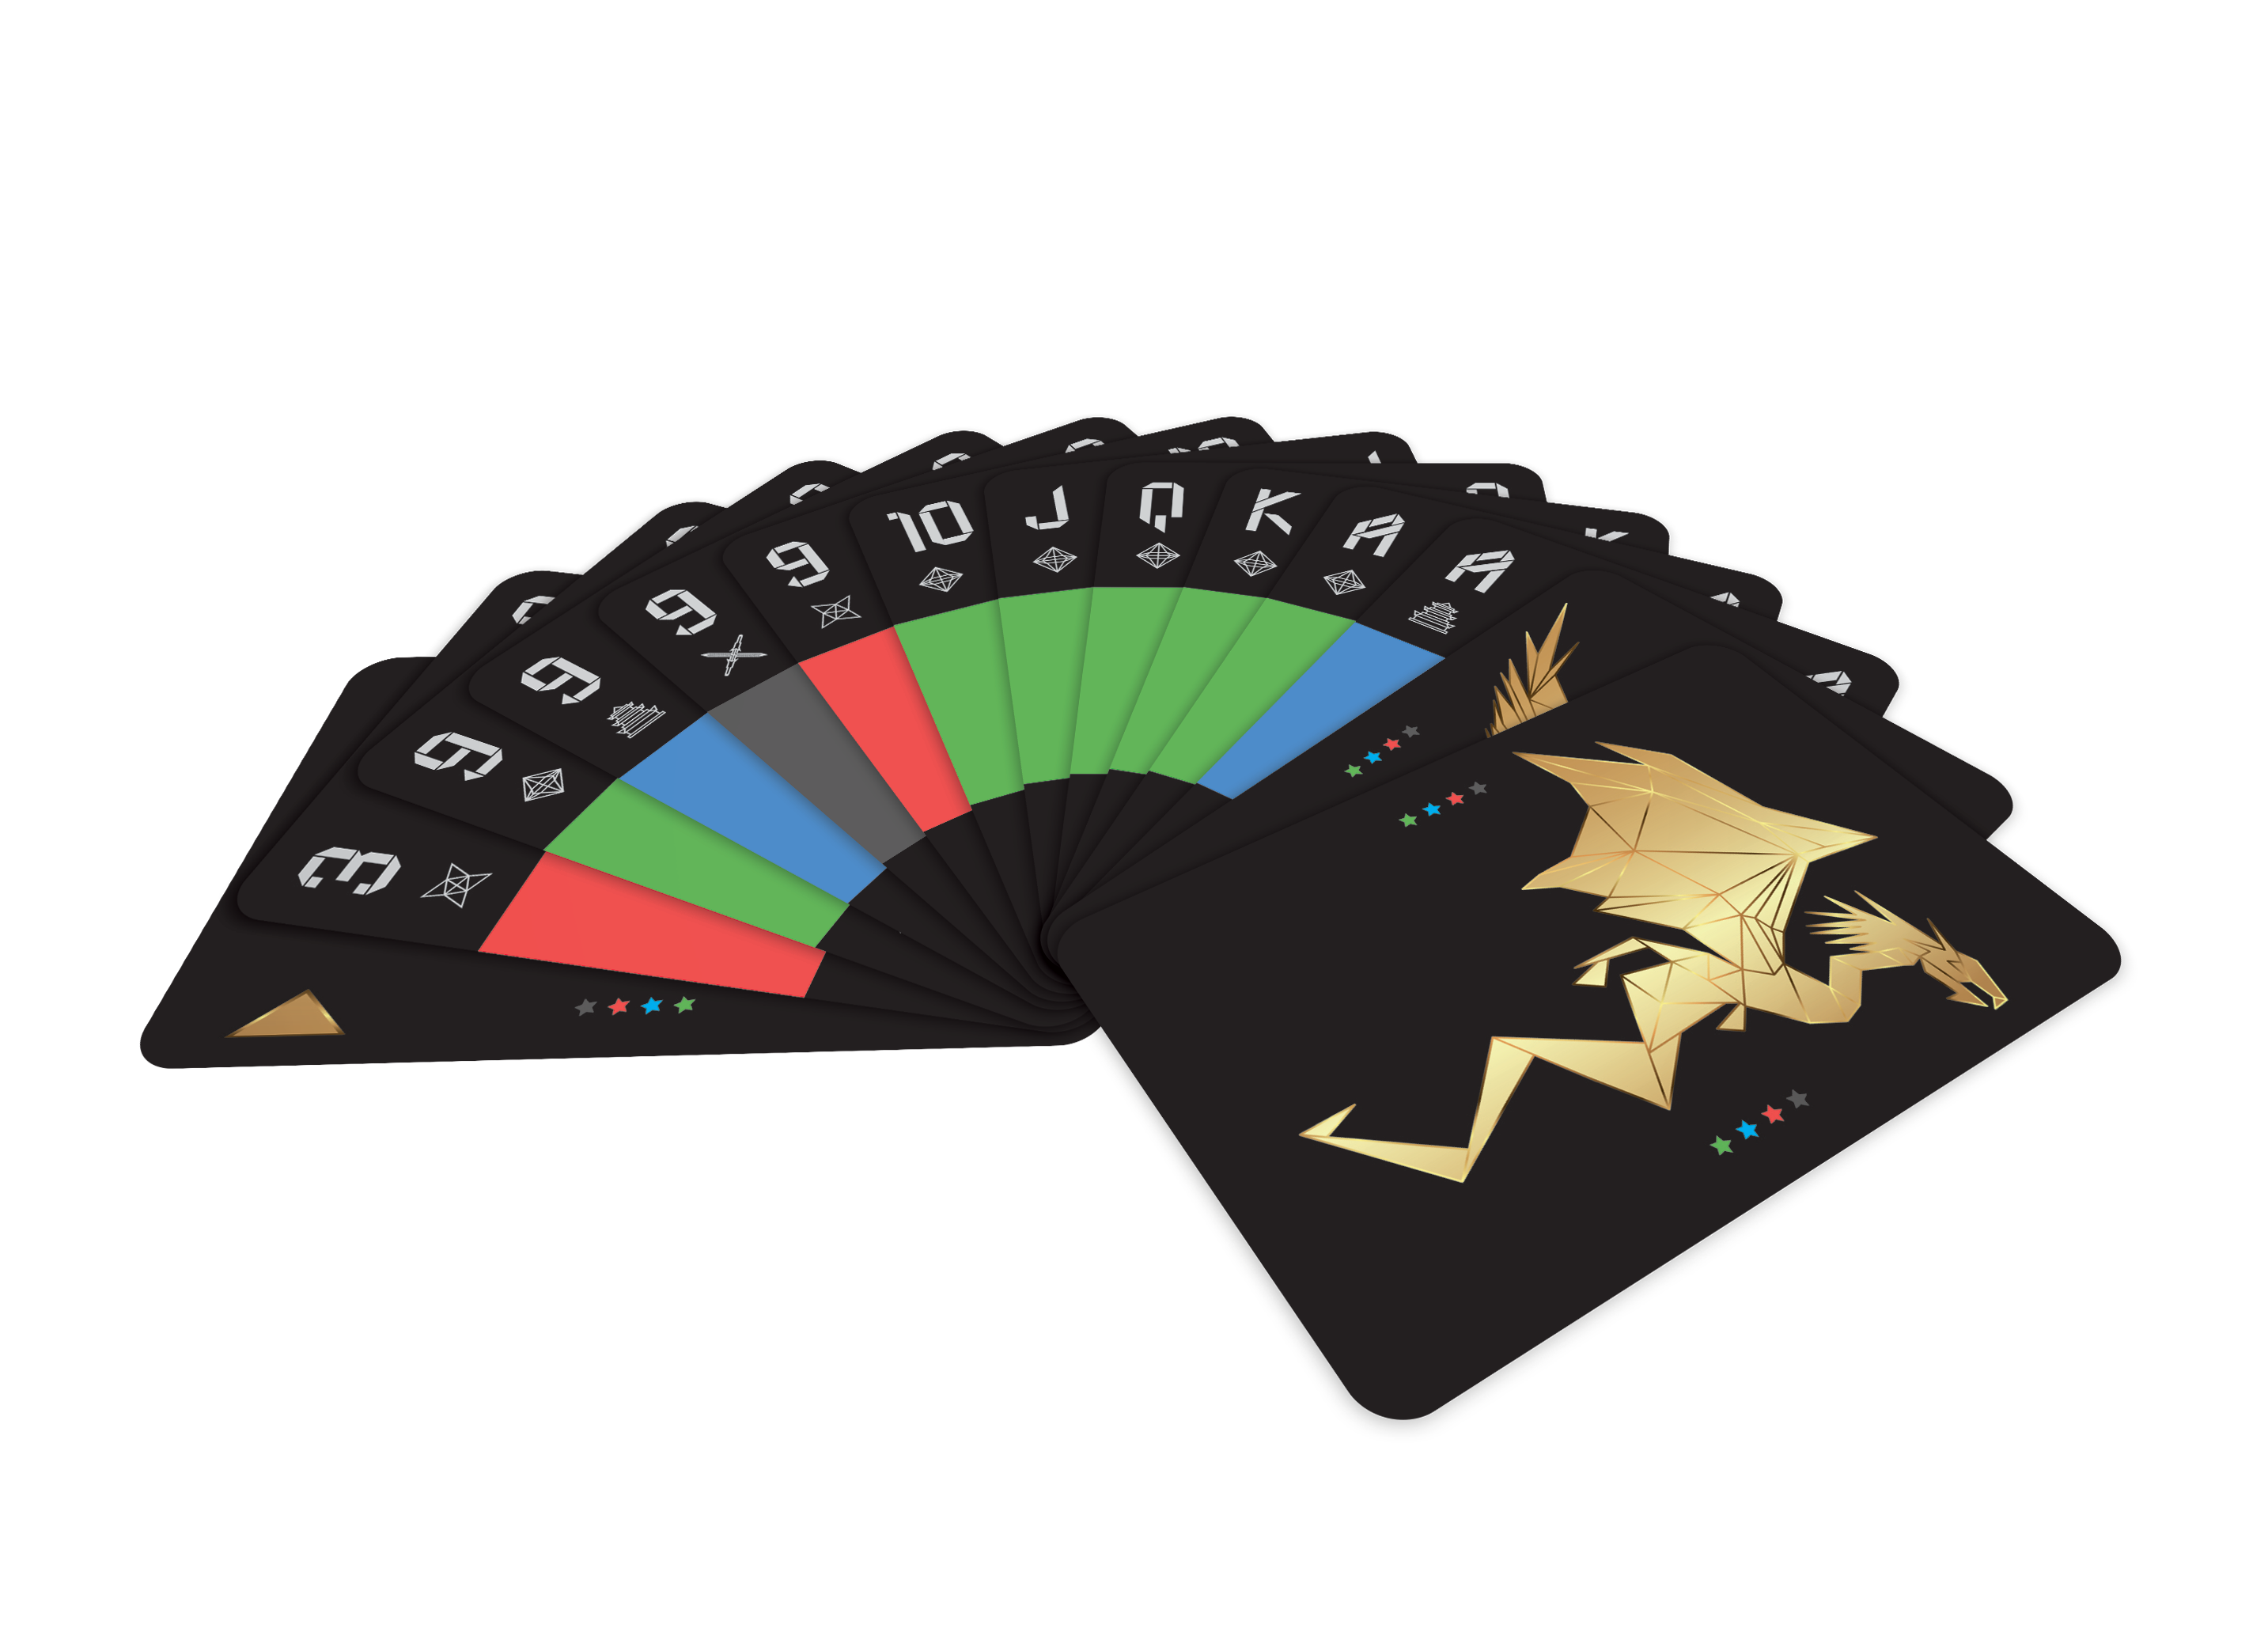 Games clipart deck card. Tichu collectors edition on